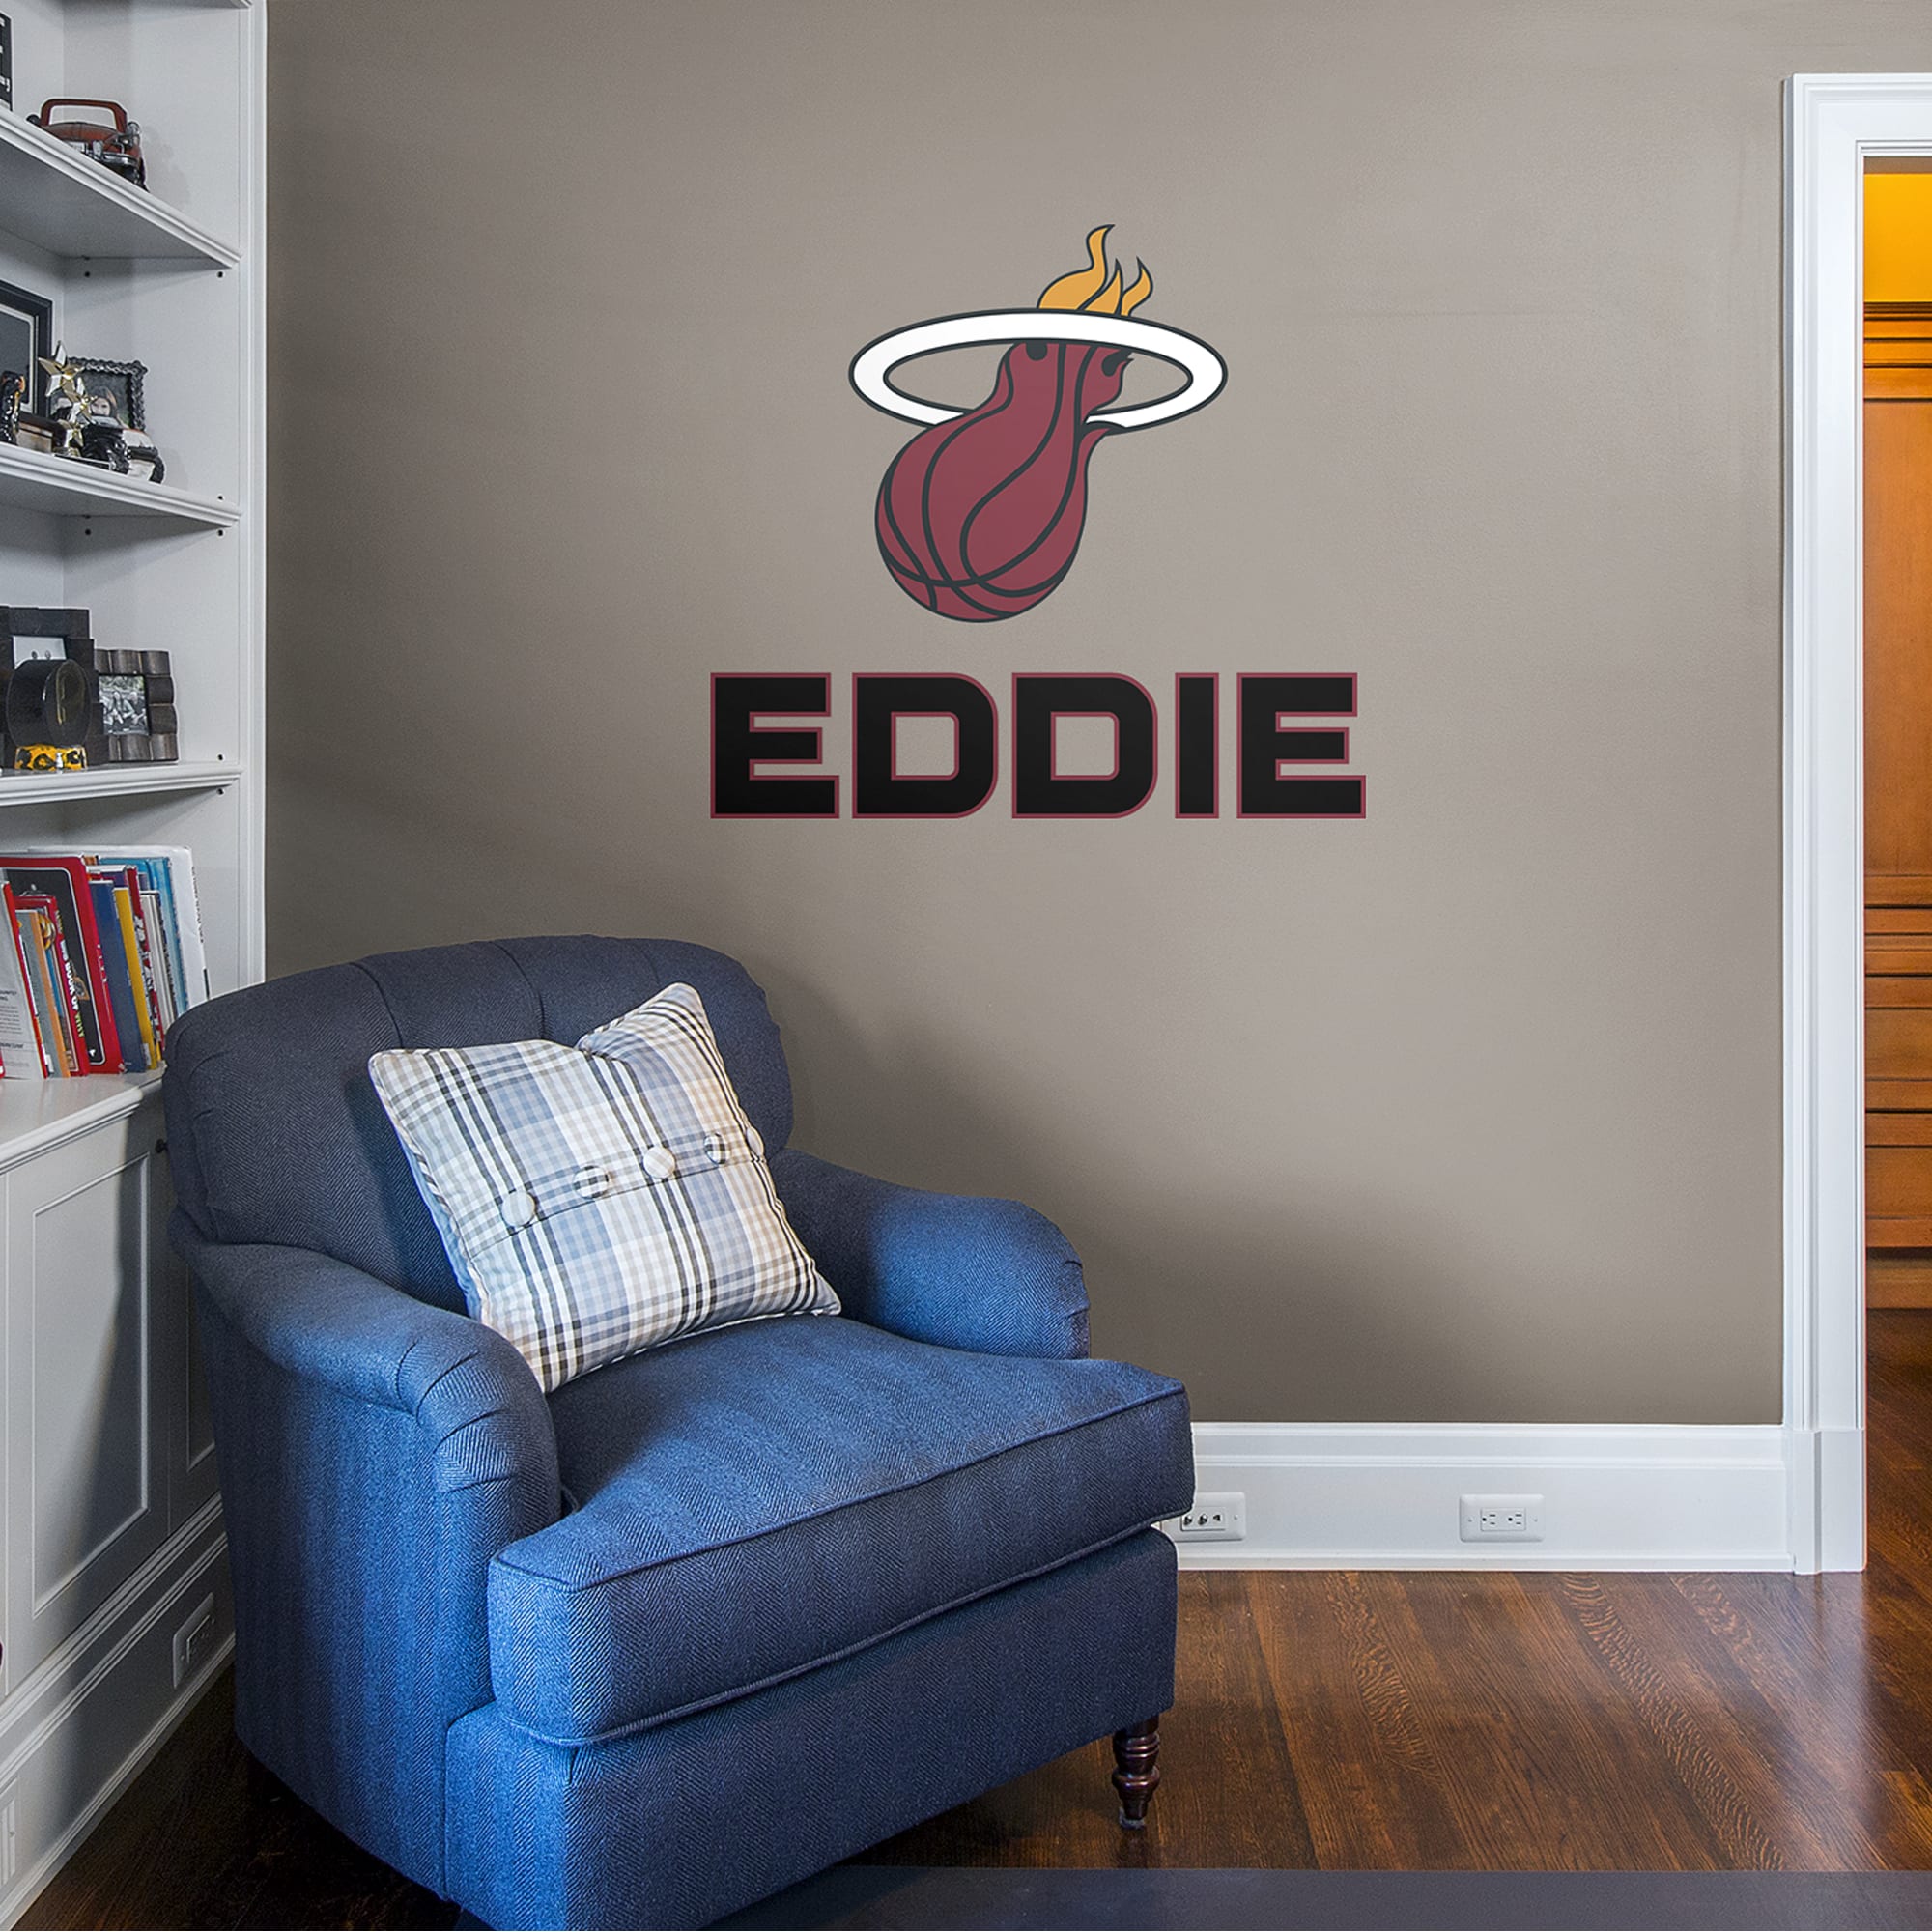 Miami Heat: Stacked Personalized Name - Officially Licensed NBA Transfer Decal in Black (52"W x 39.5"H) by Fathead | Vinyl